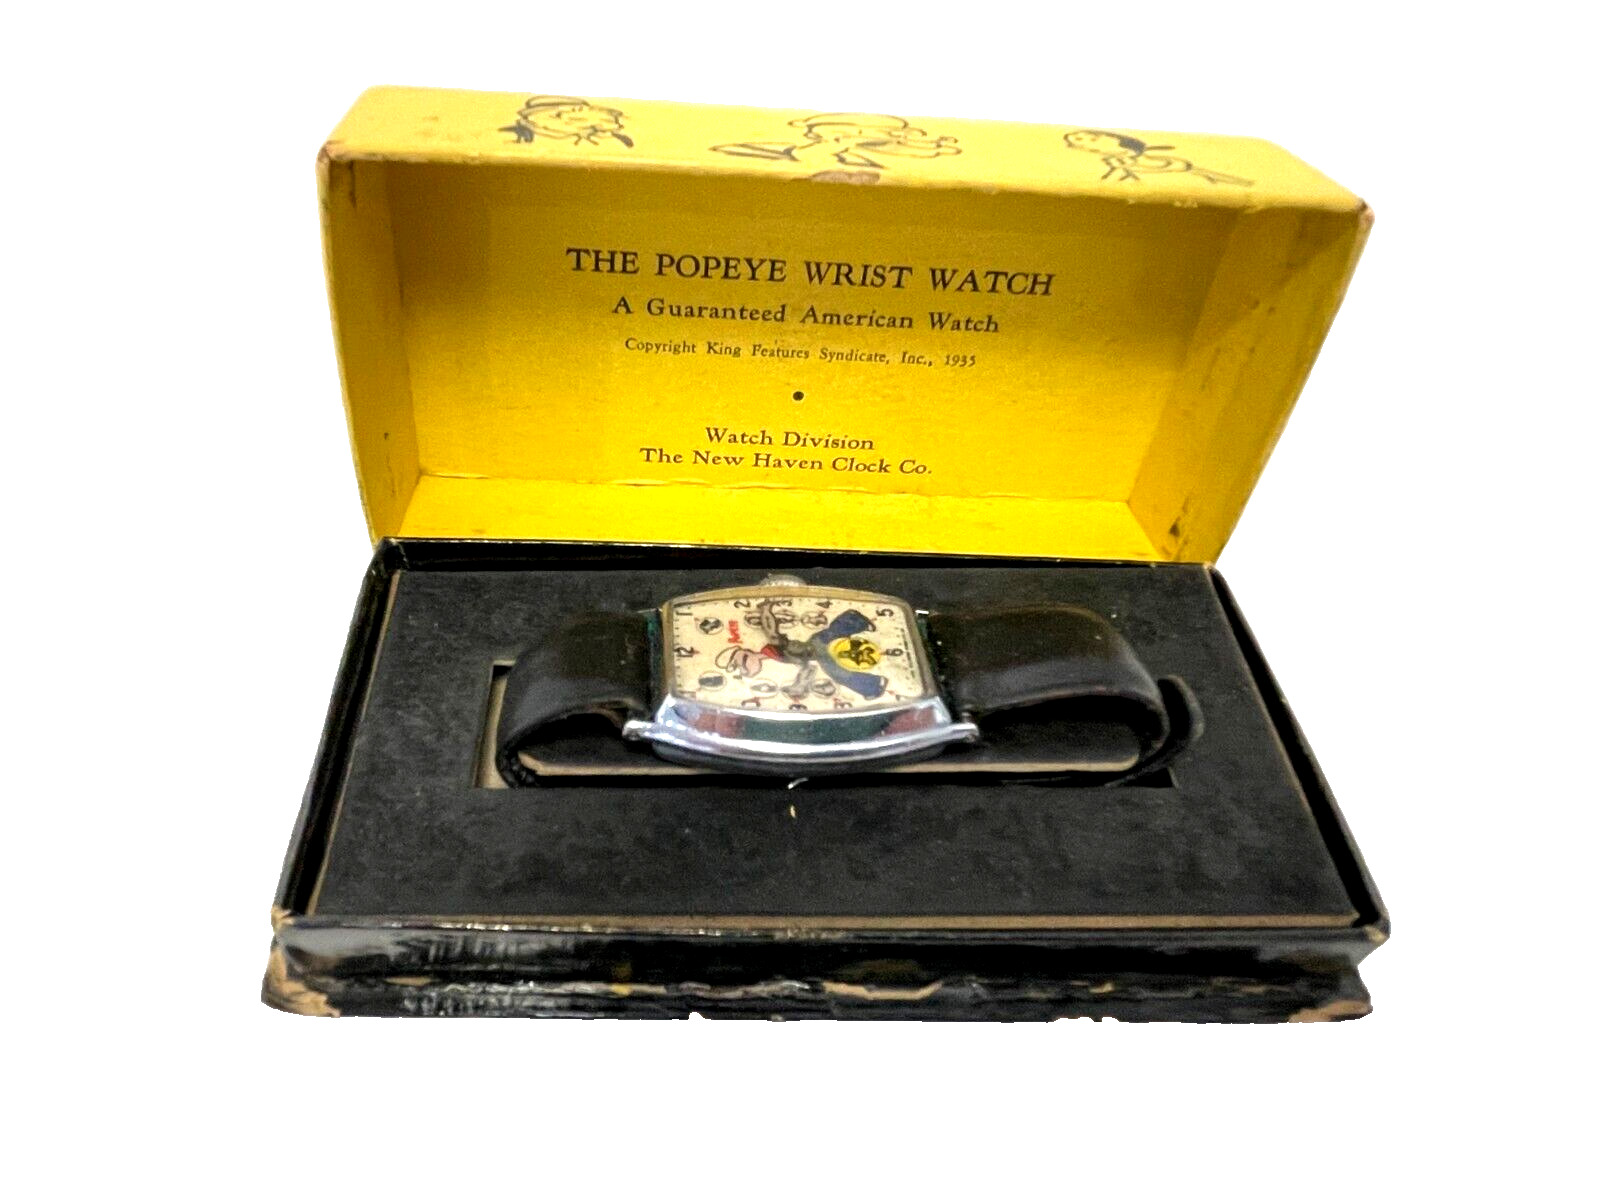 Popeye Wrist Watch 1930s Rare New Haven Character Watch - King Features WITH BOX